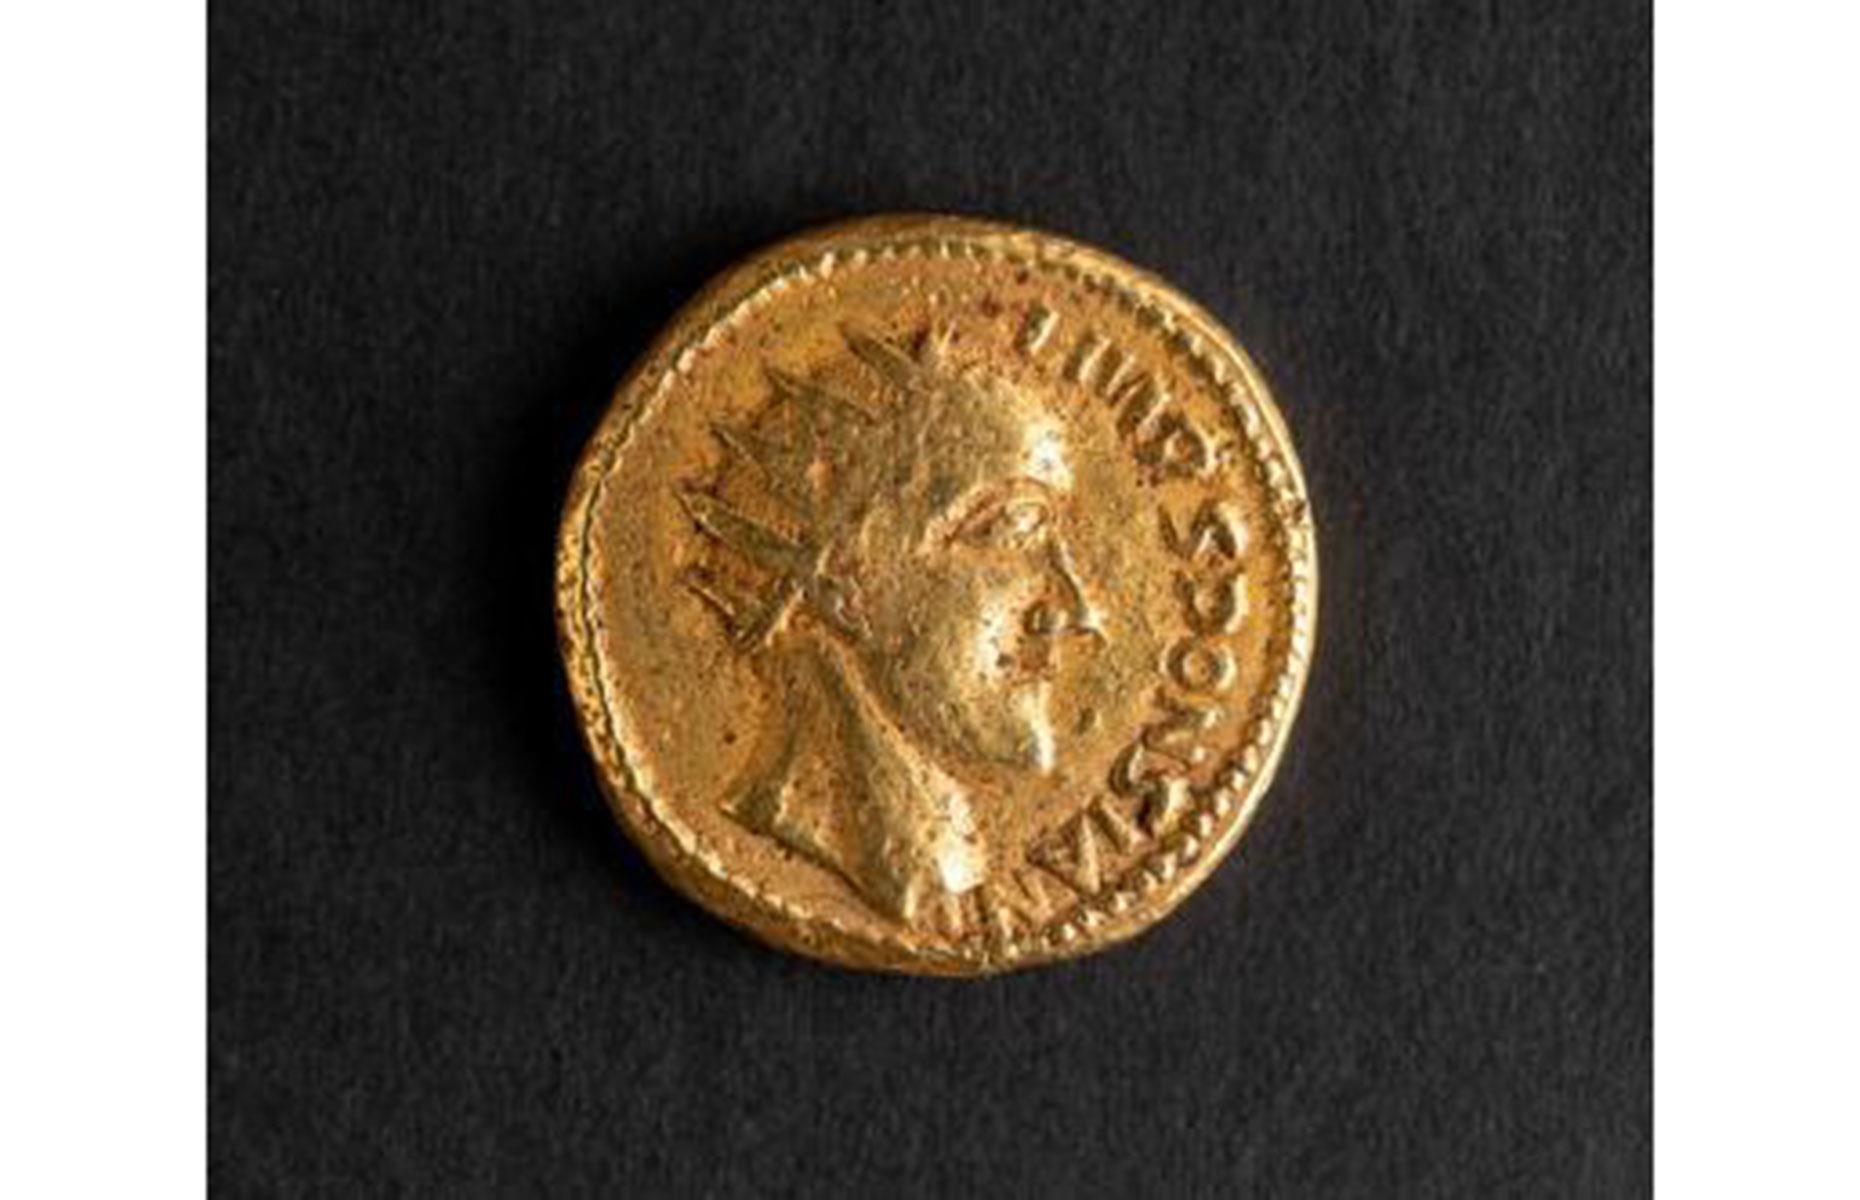 <p>History doesn't change very often (because, well, it's already happened) but a 4th-century Roman coin has just rewritten a brief period in Europe's past. Discovered in Romania 300 years ago, the coin was always considered a fake as it dated from the reign of Emperor Sponsian – an emperor long dismissed by historians as a fictional character. Now, after new analysis, scientists say scratch marks on the coin prove its validity, and therefore that of the emperor that adorns it. Experts must now reckon with a brand-new Roman emperor, though there is no suggestion he ever ruled centrally from Rome.</p>